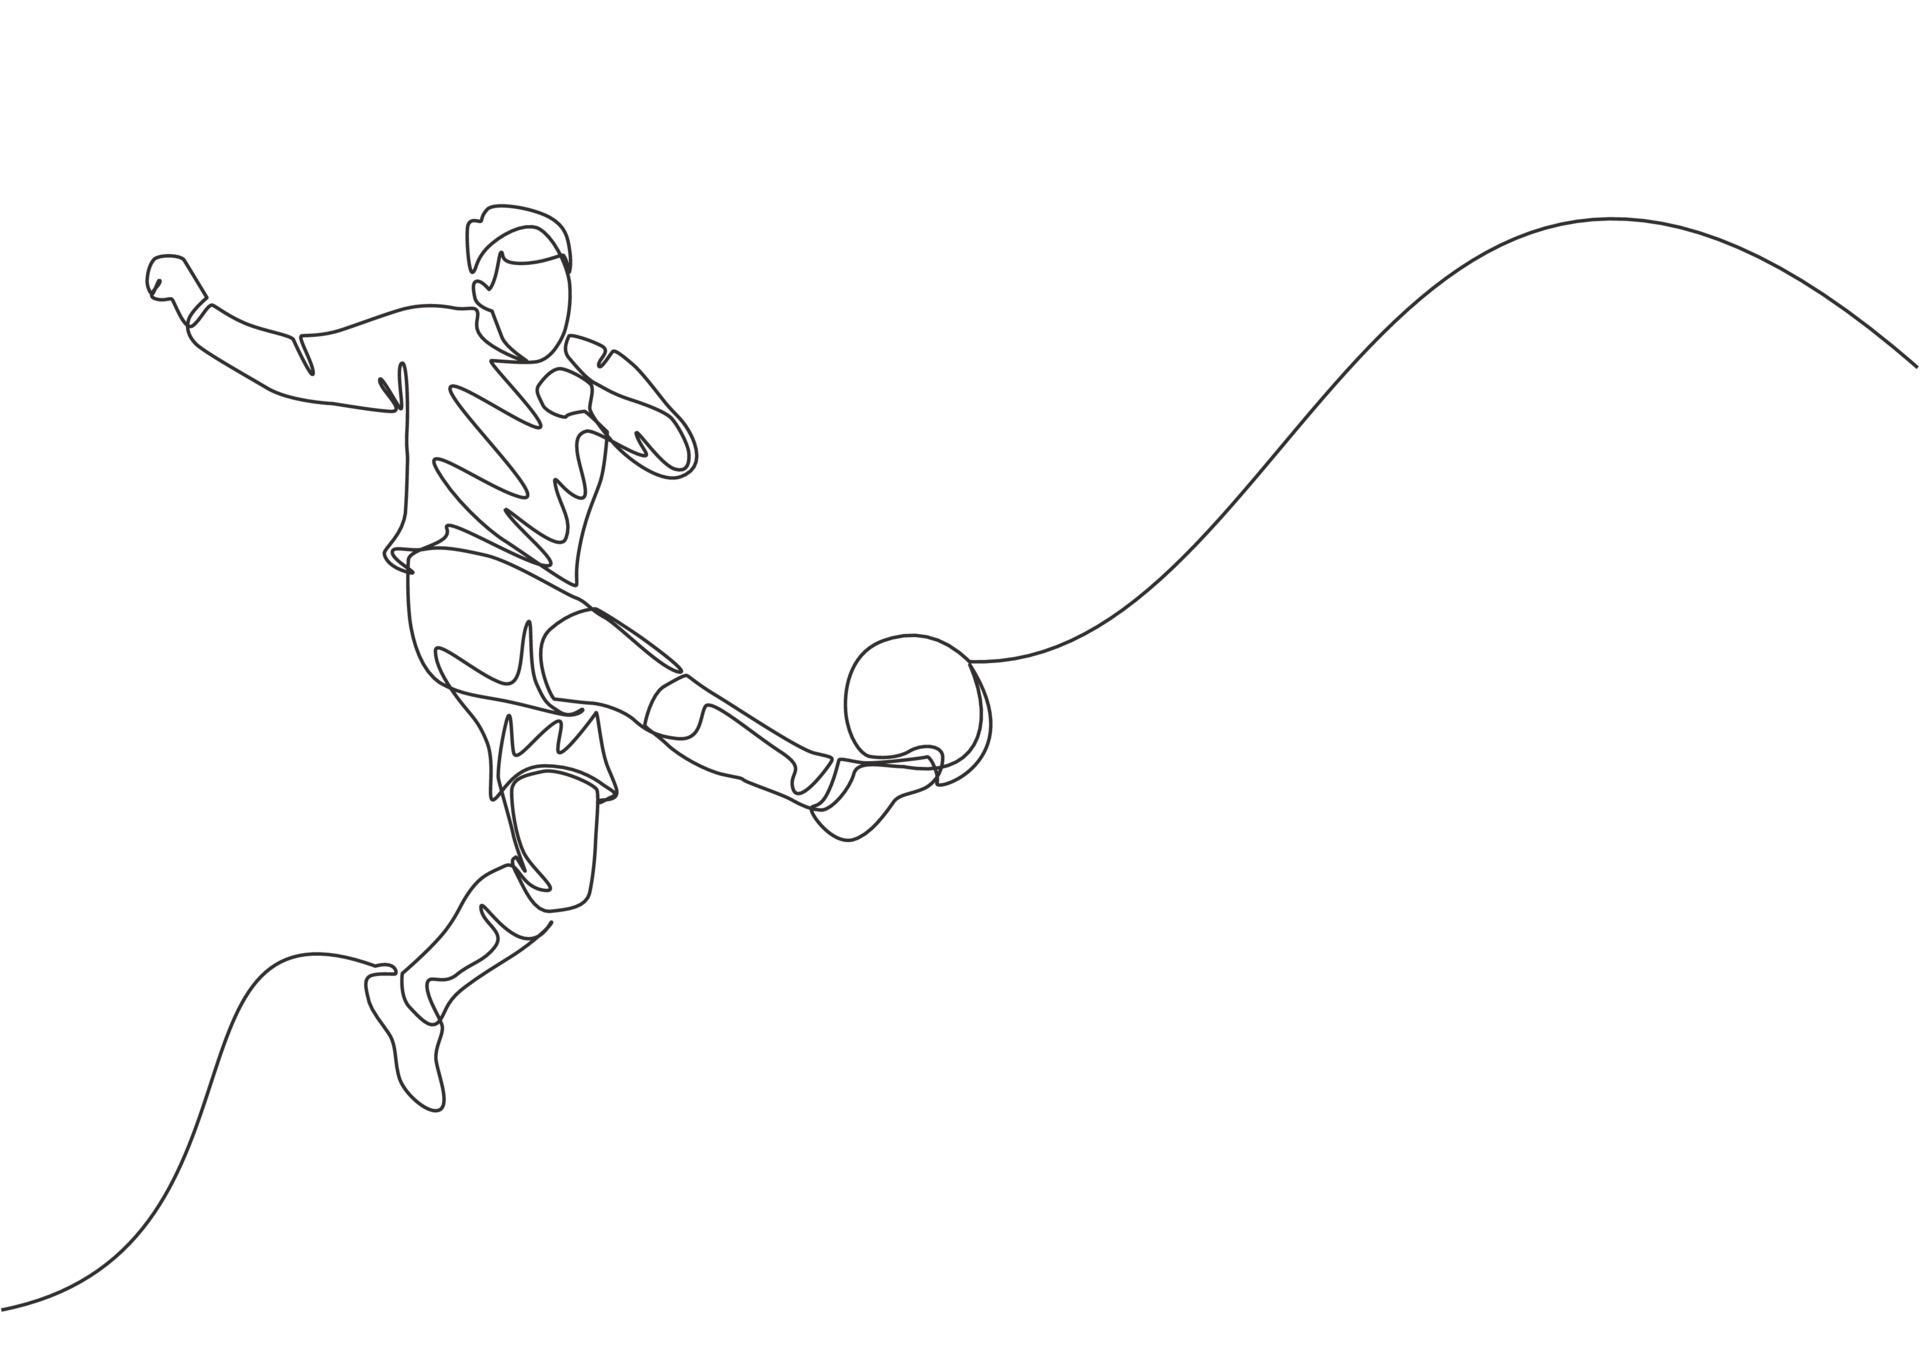 Handwriting text writing Kick Off. Concept meaning start or resumption of  football match in which player kicks ball. Stock Illustration